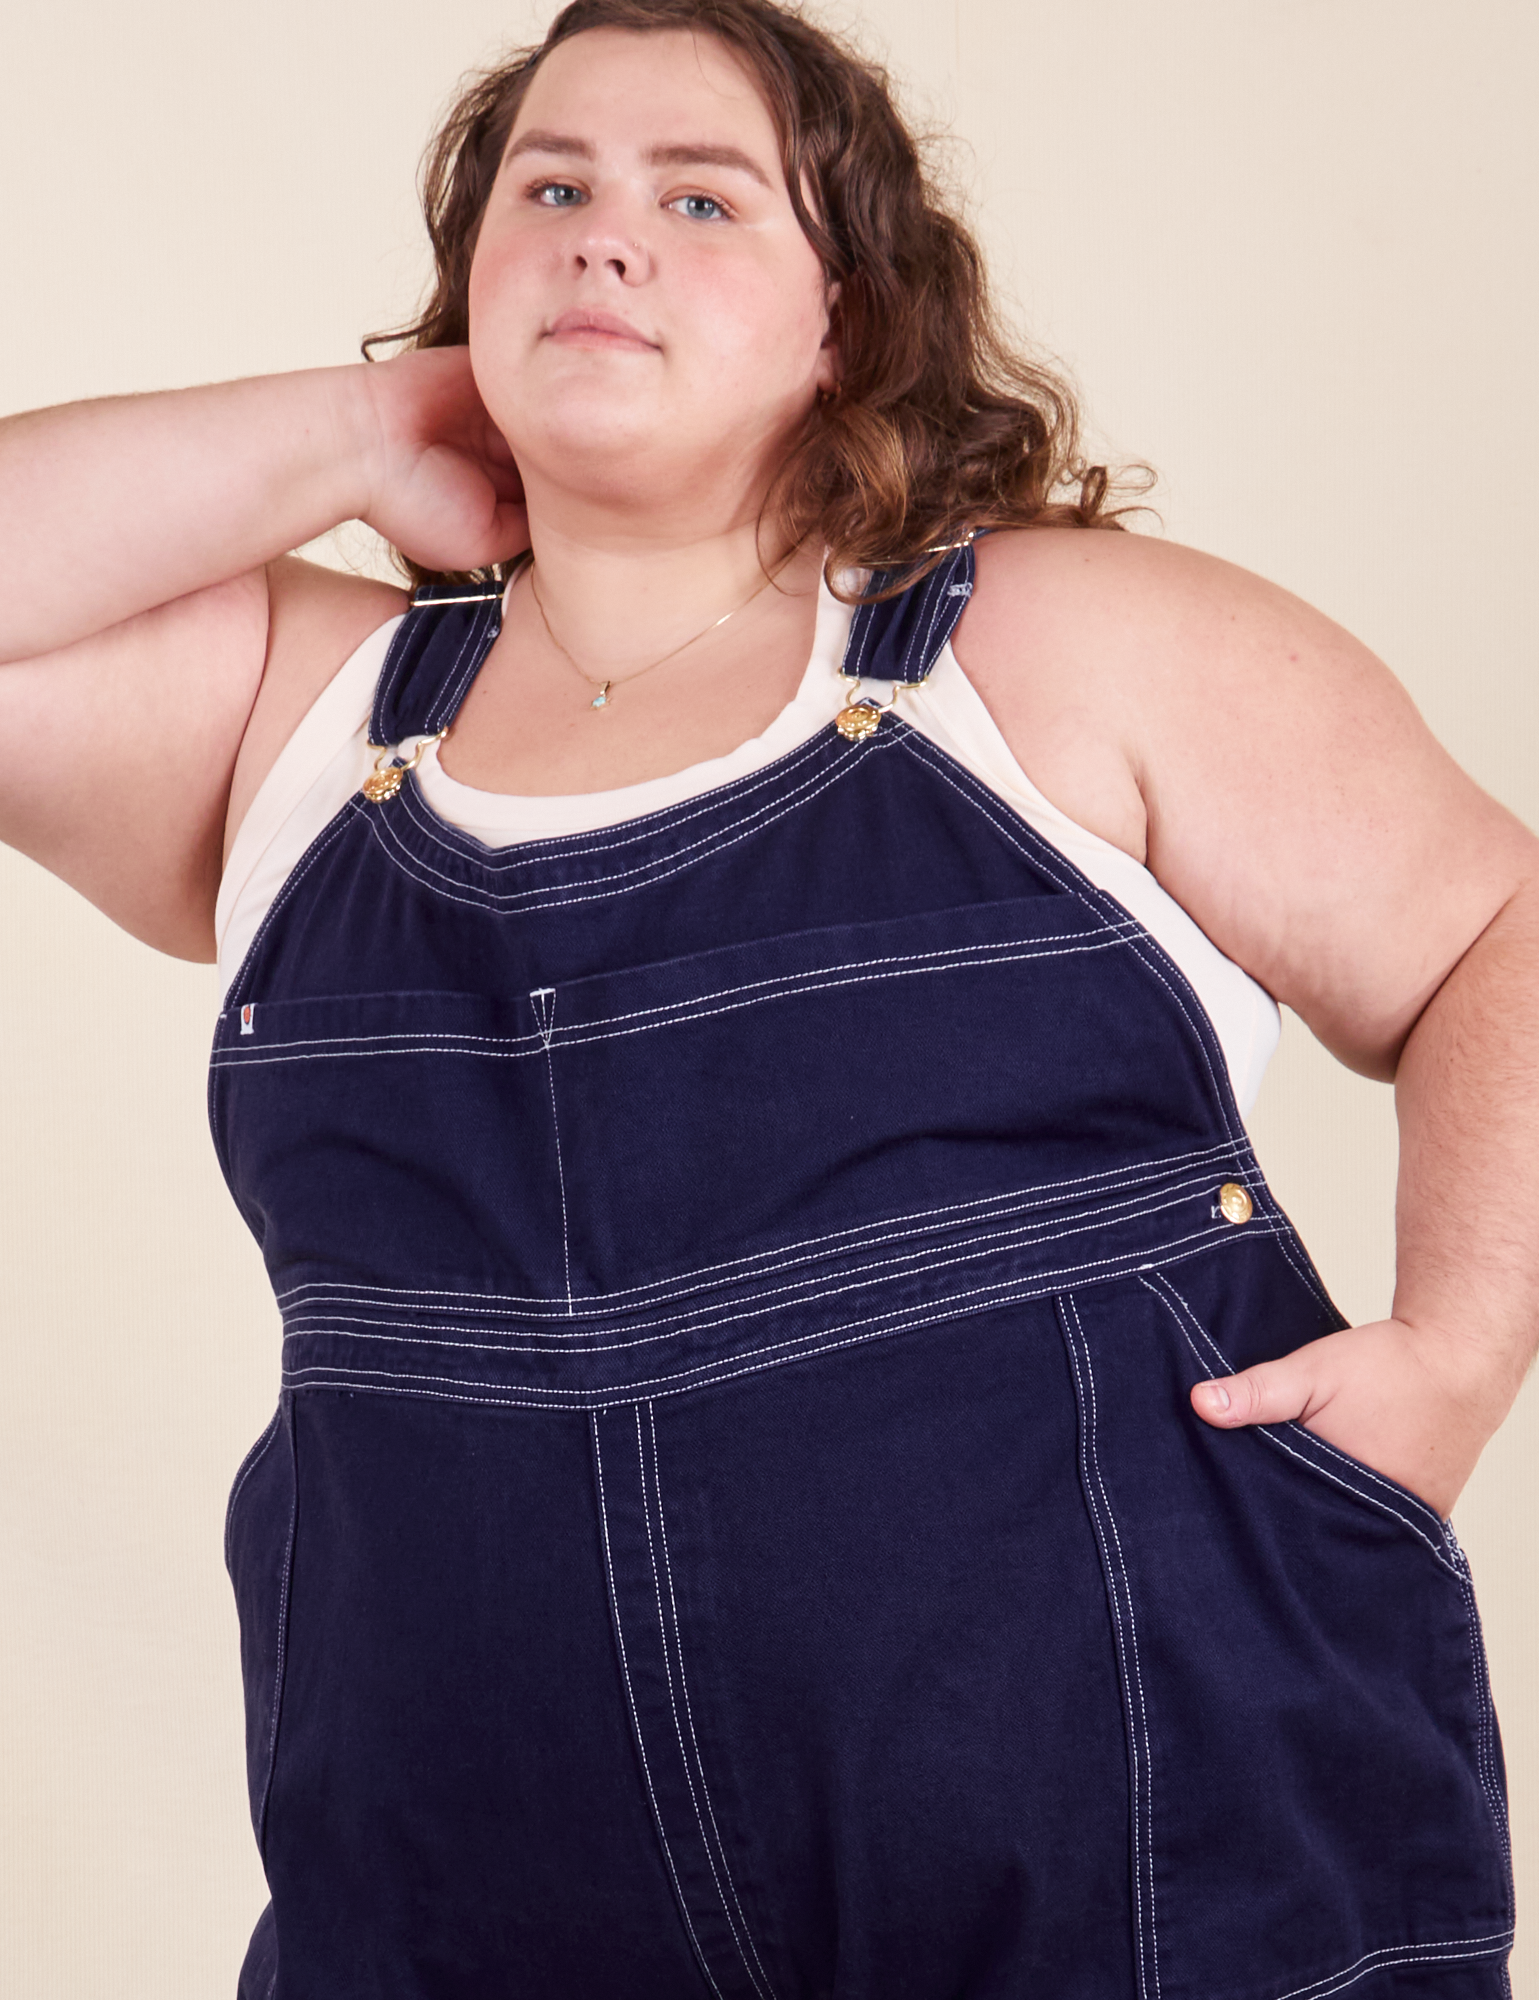 Mara is wearing Original Overalls in Navy Blue and vintage off-white Tank Top